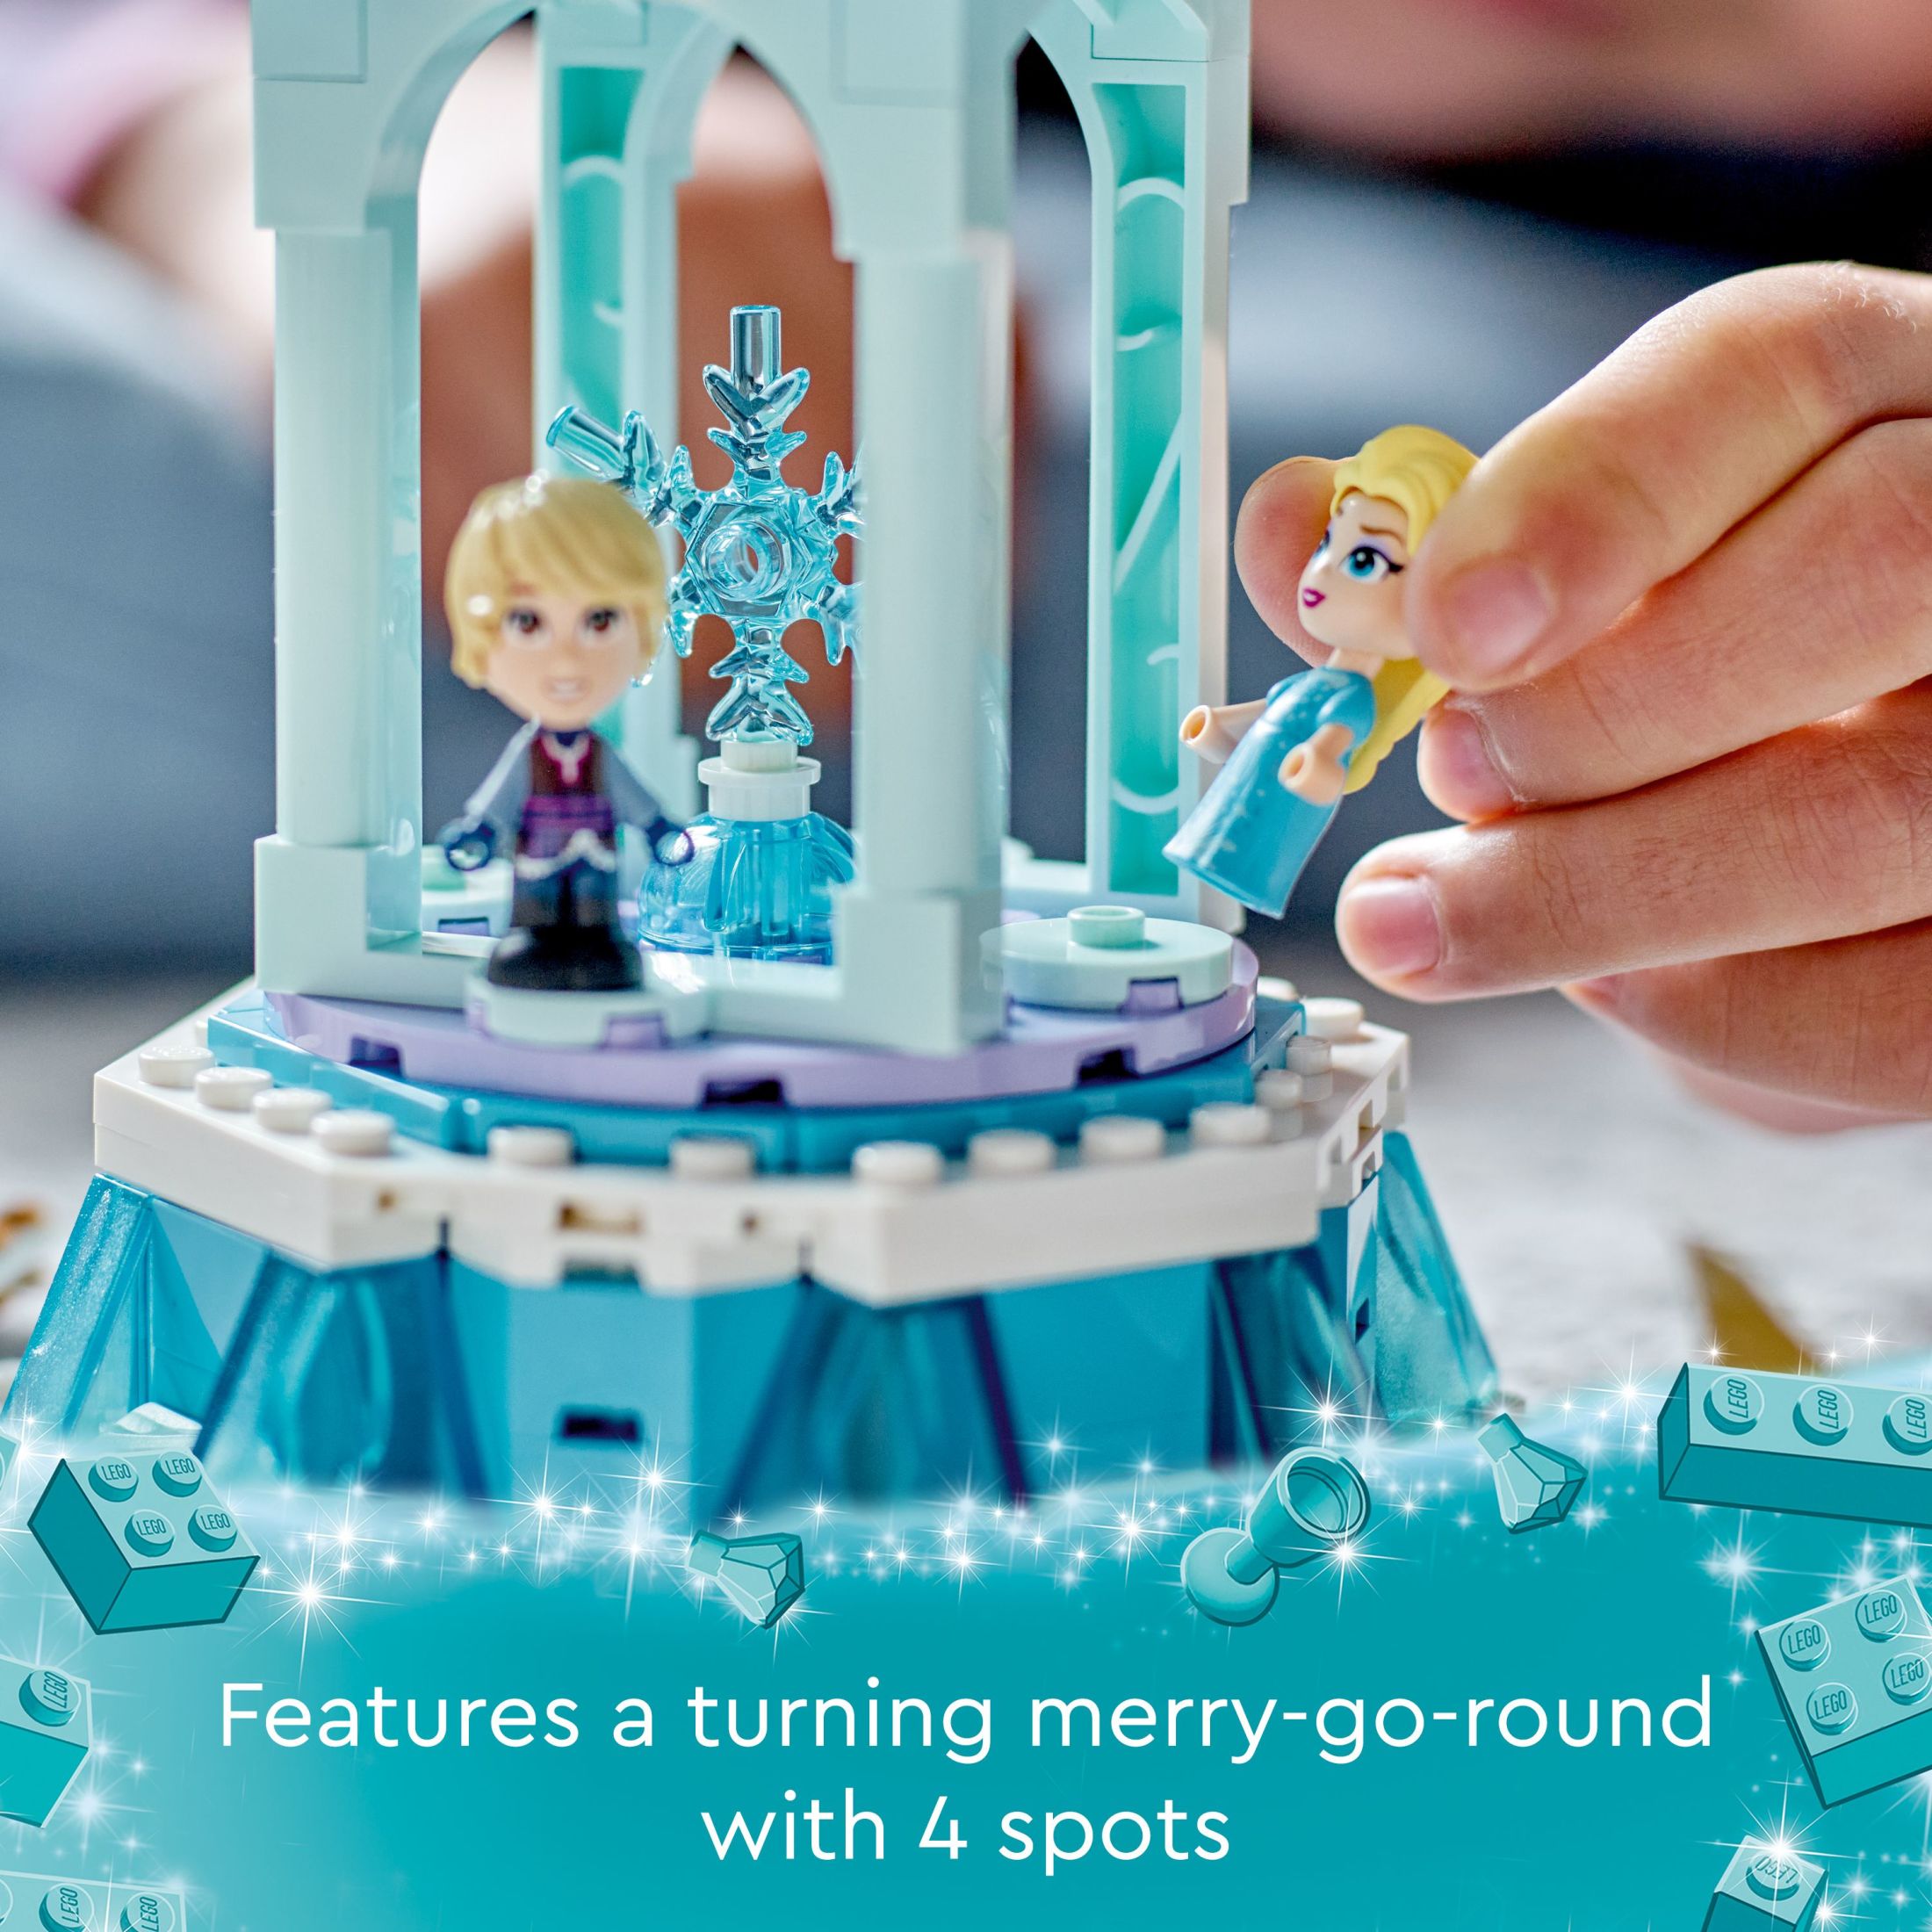 LEGO Disney Frozen Anna and Elsa’s Magical Carousel 43218 Ice Palace Building Toy Set with Disney Princess Elsa, Anna and Olaf, Great Birthday Gift for 6 Year Olds - image 5 of 8